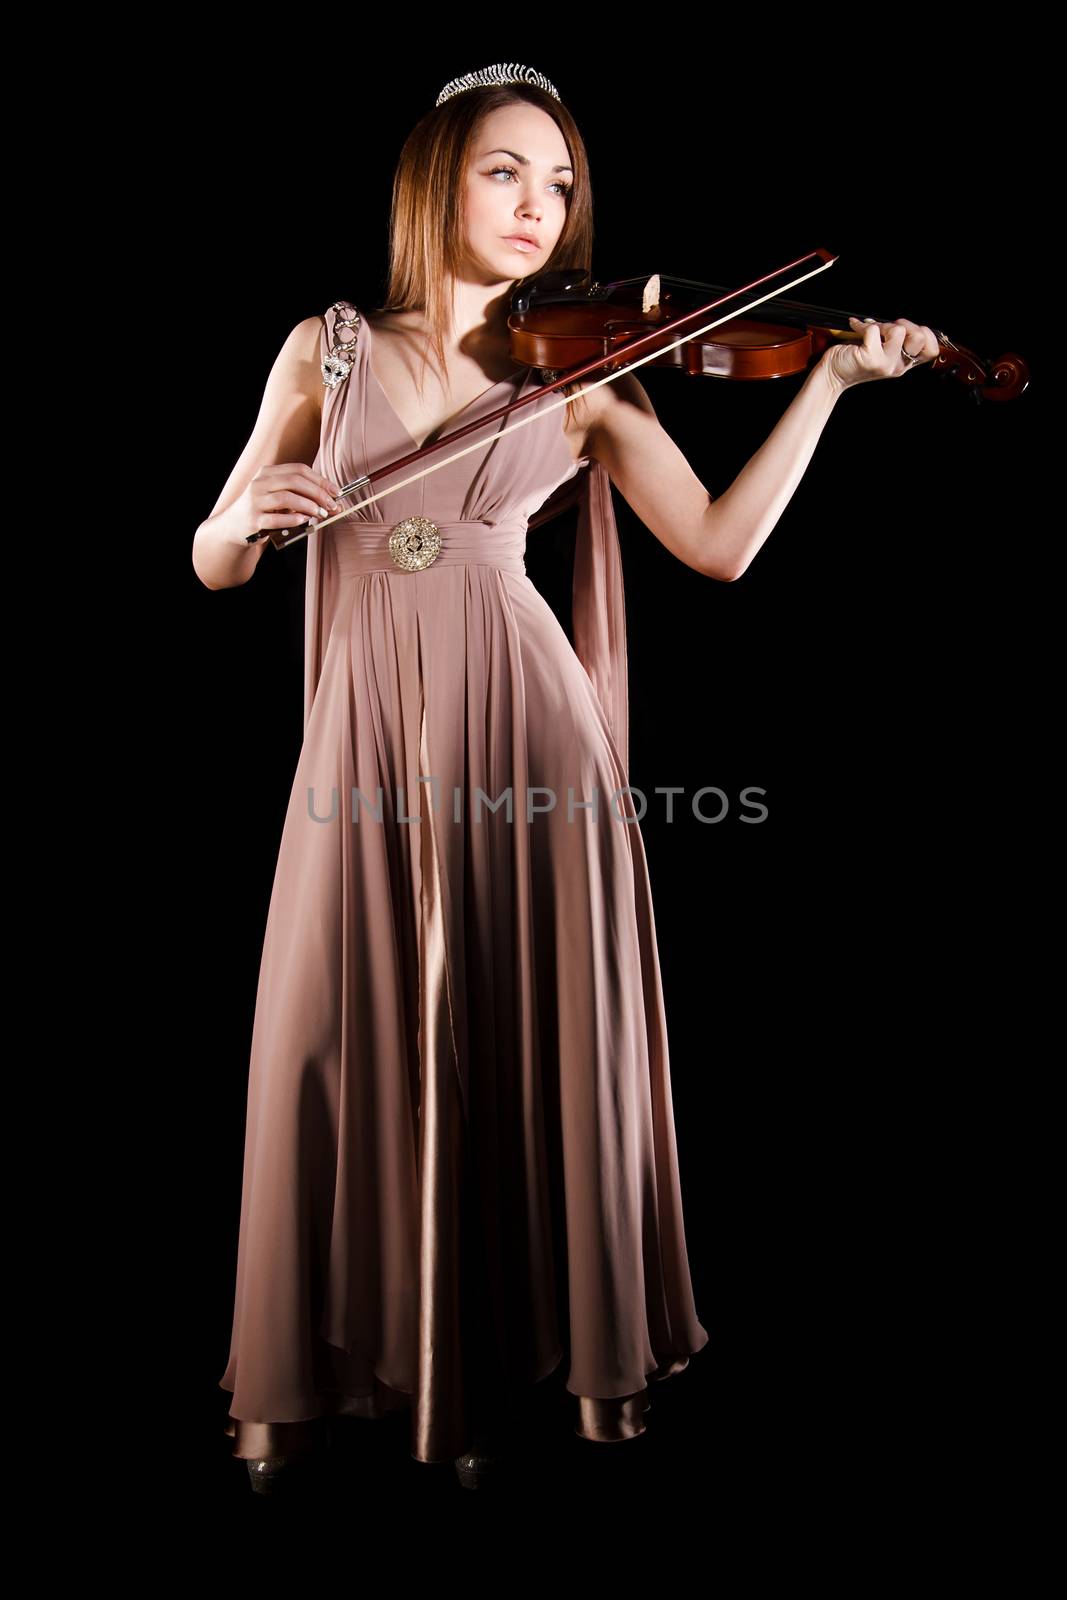 Pretty young woman playing a violin over black background